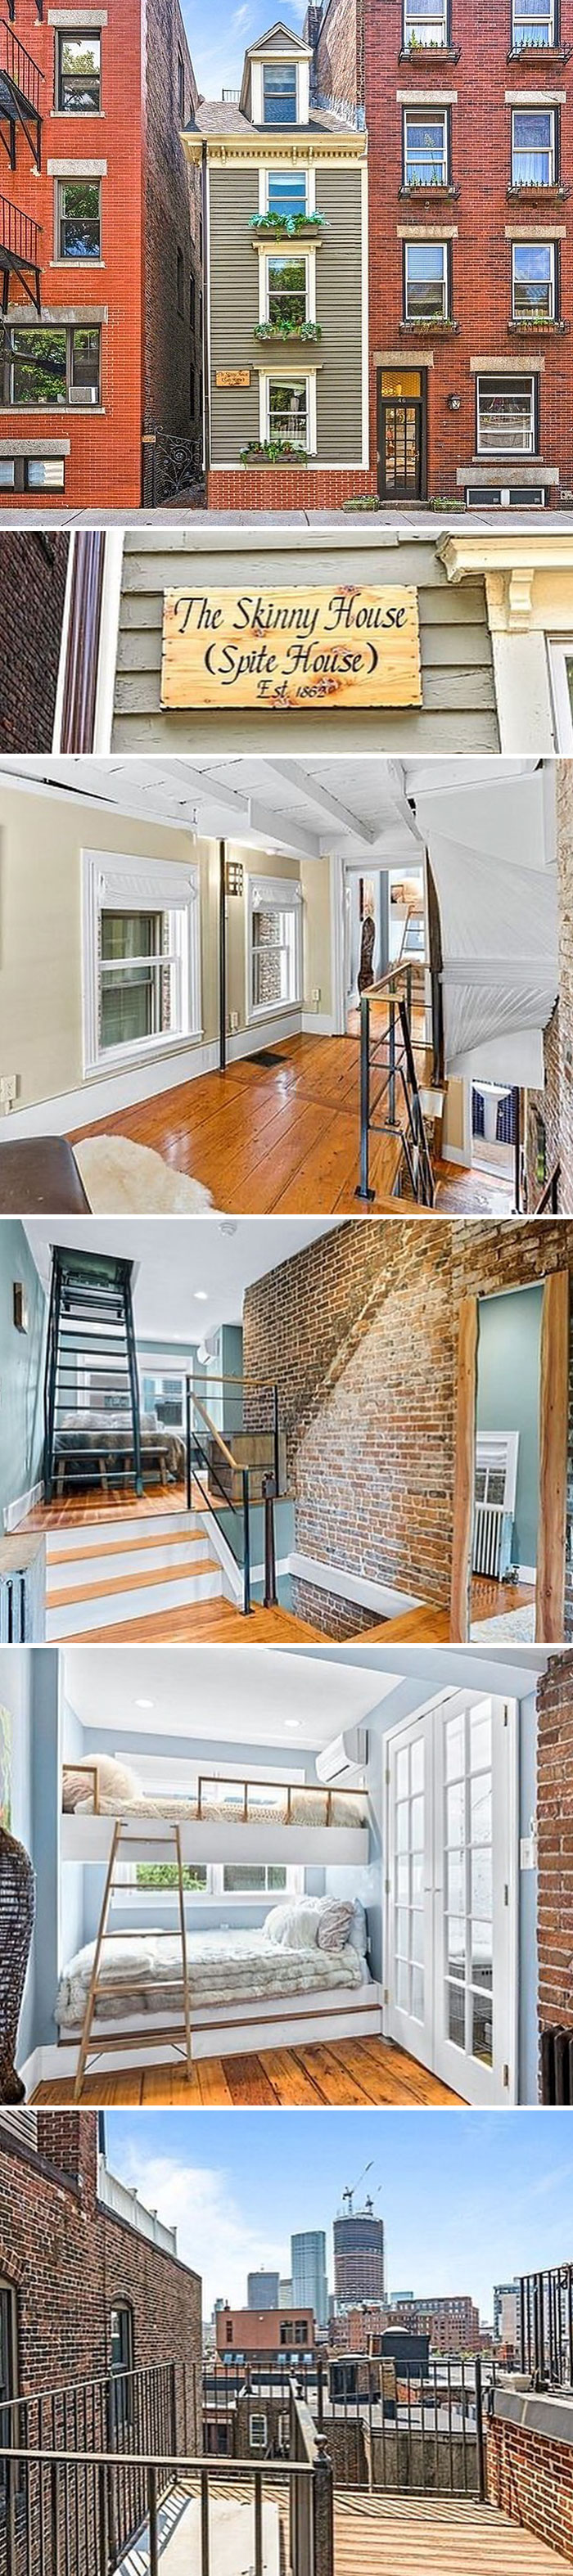 The “Skinny House” Also Known As The “Spite House” In Boston Is For Sale. $1,200,000. Boston, Ma. 2 Bd, 1 Ba. 1,165 Sf. According To Wikipedia It Was Built By A Brother To Spite His Brother To Block Us View And Sunlight Who Apparently Depleted His Inheritance After The Civil War